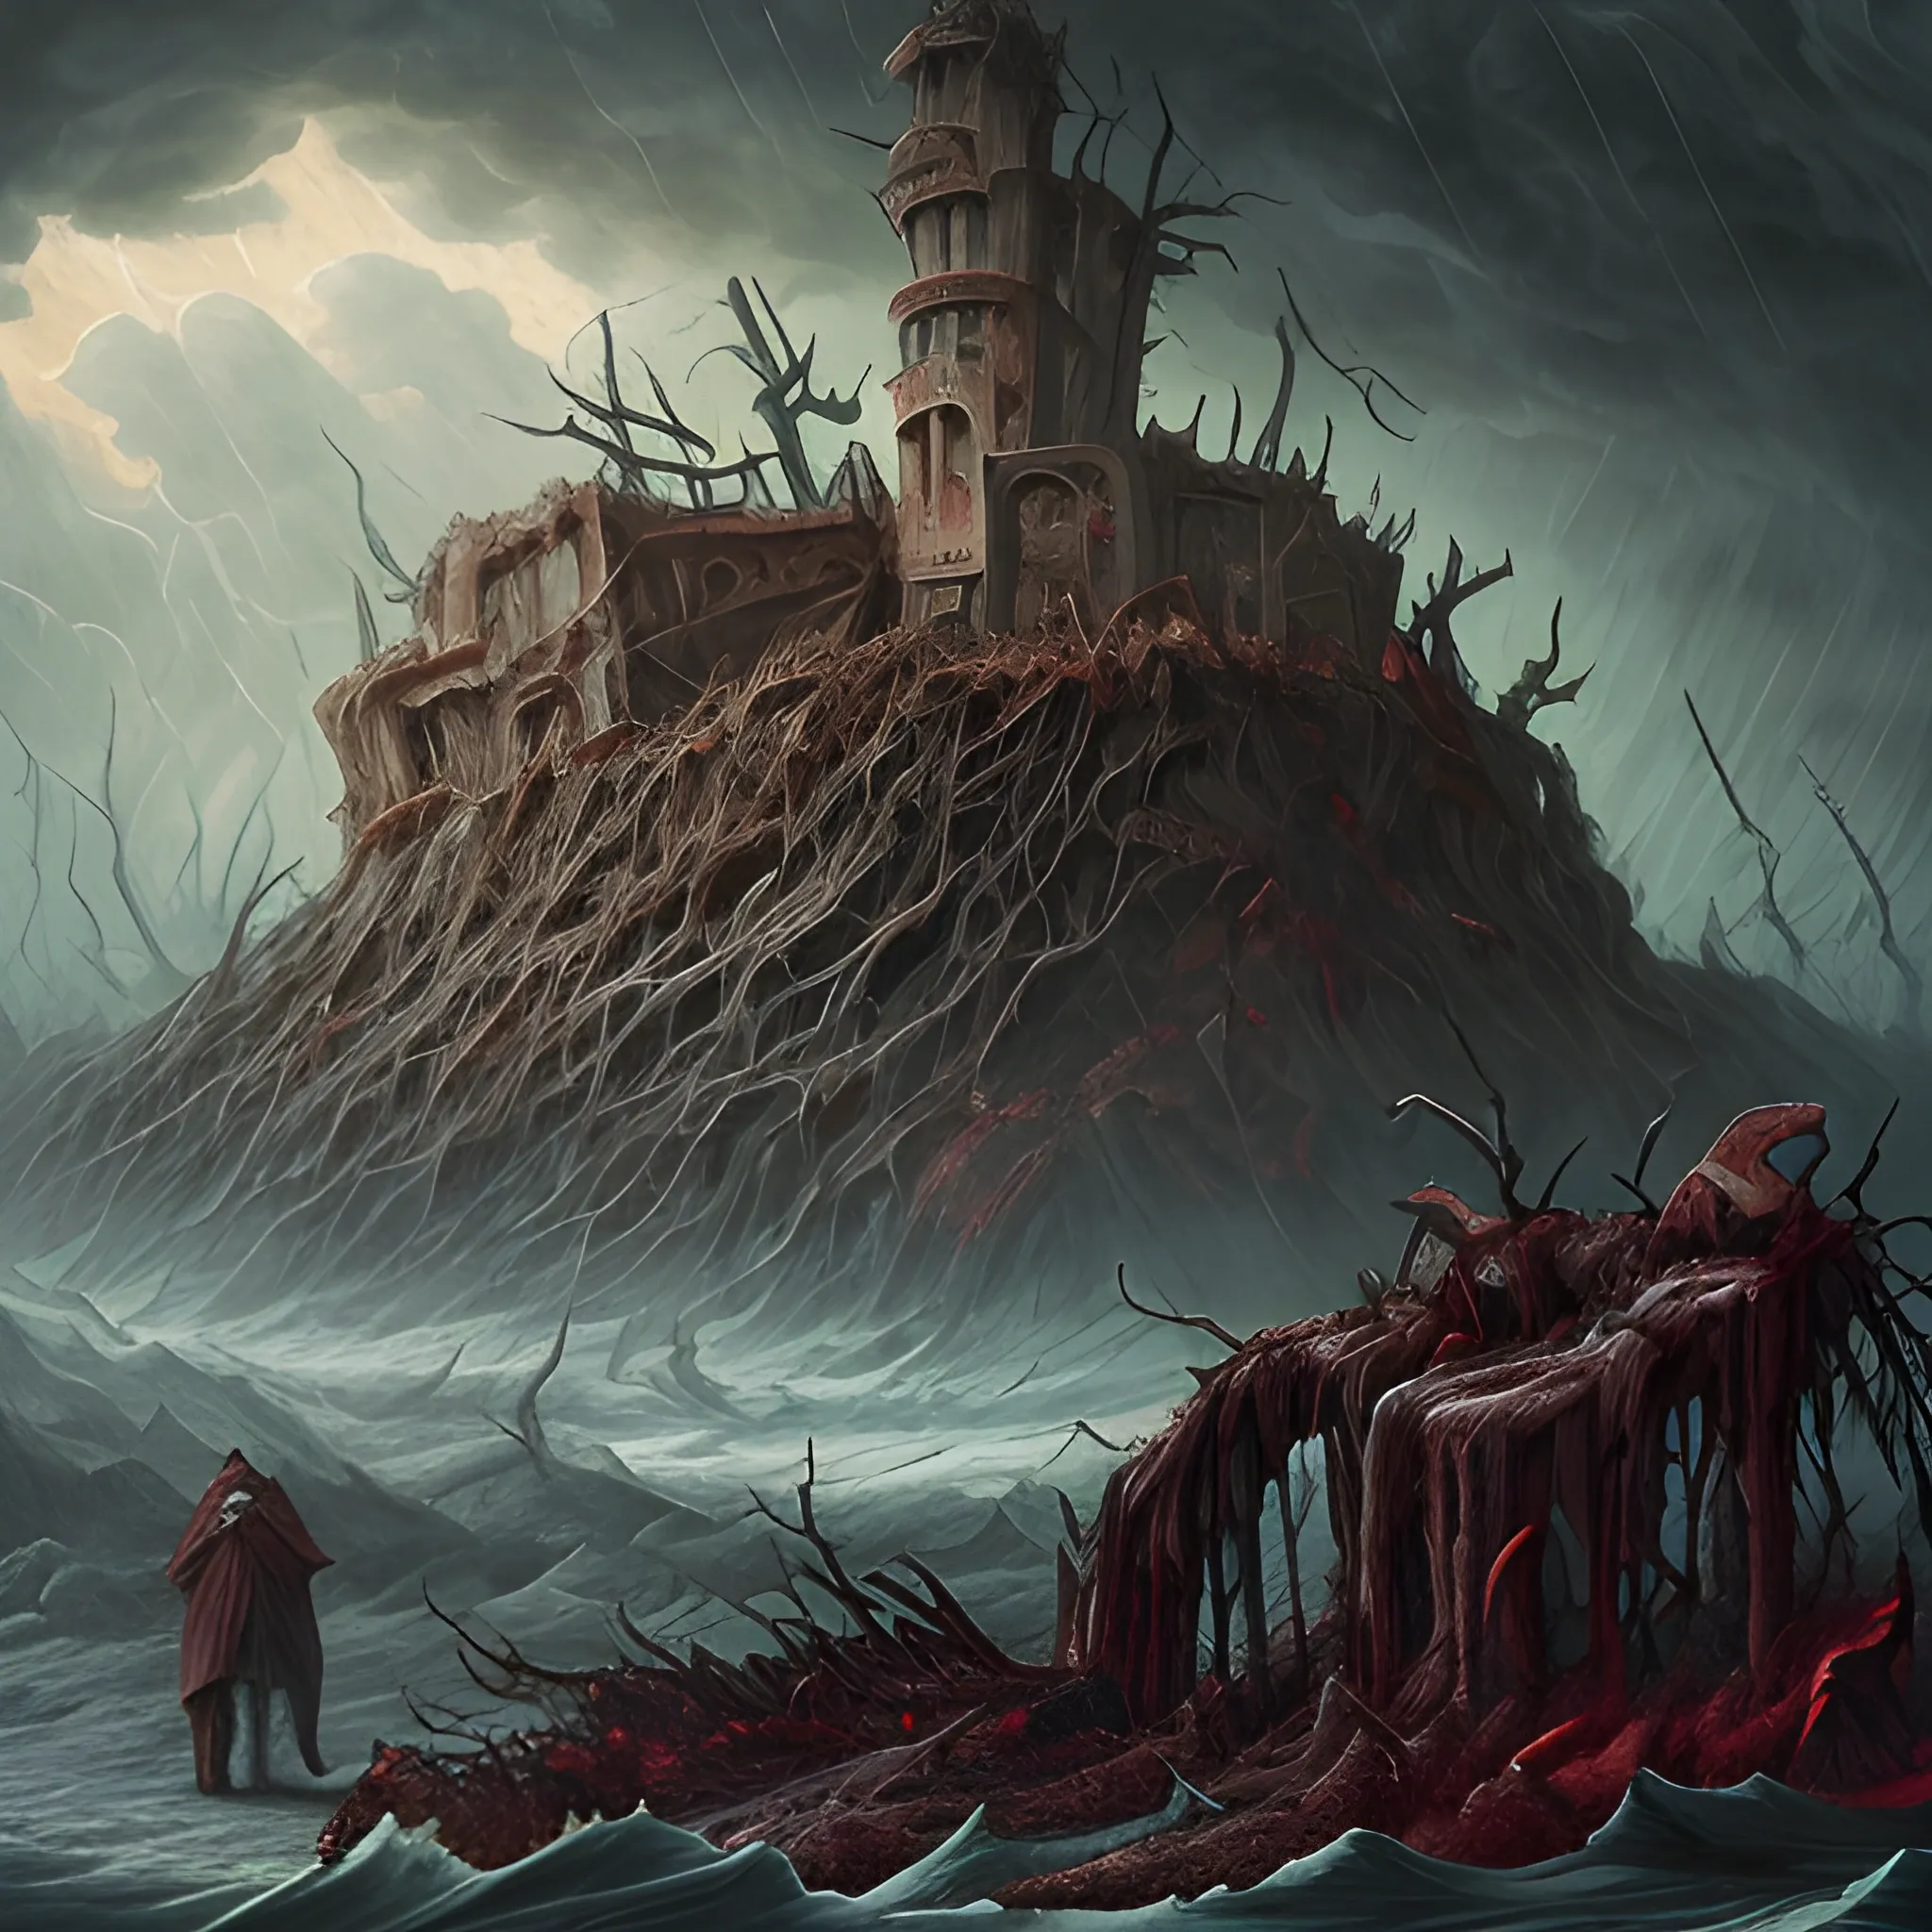 Depicting the corrupted landscape and foul weather that serve as torment for the gluttonous souls condemned to this region, unable to find relief from the elements.